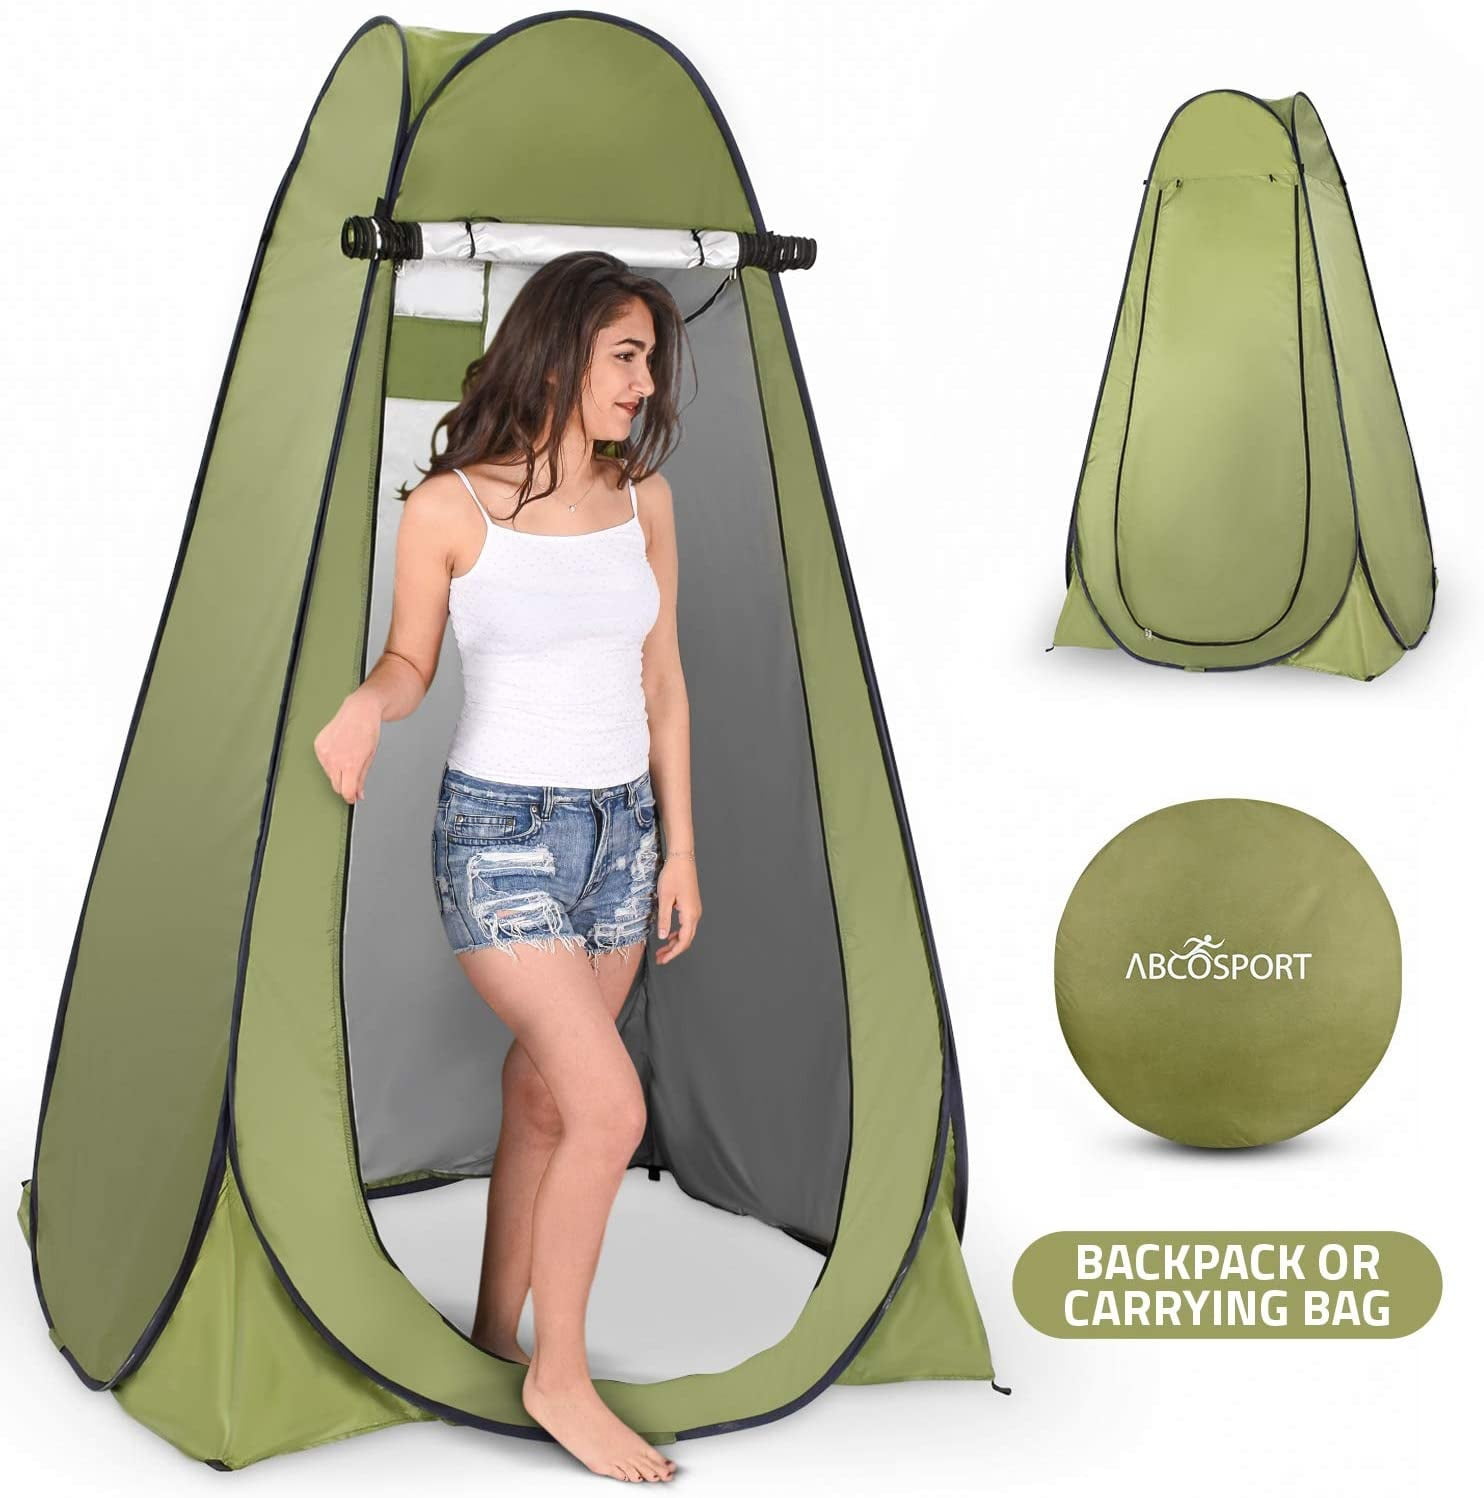 PORTABLE POP UP TENT OUTDOOR CAMPING TOILET SHOWER INSTANT CHANGING PRIVACY ROOM 